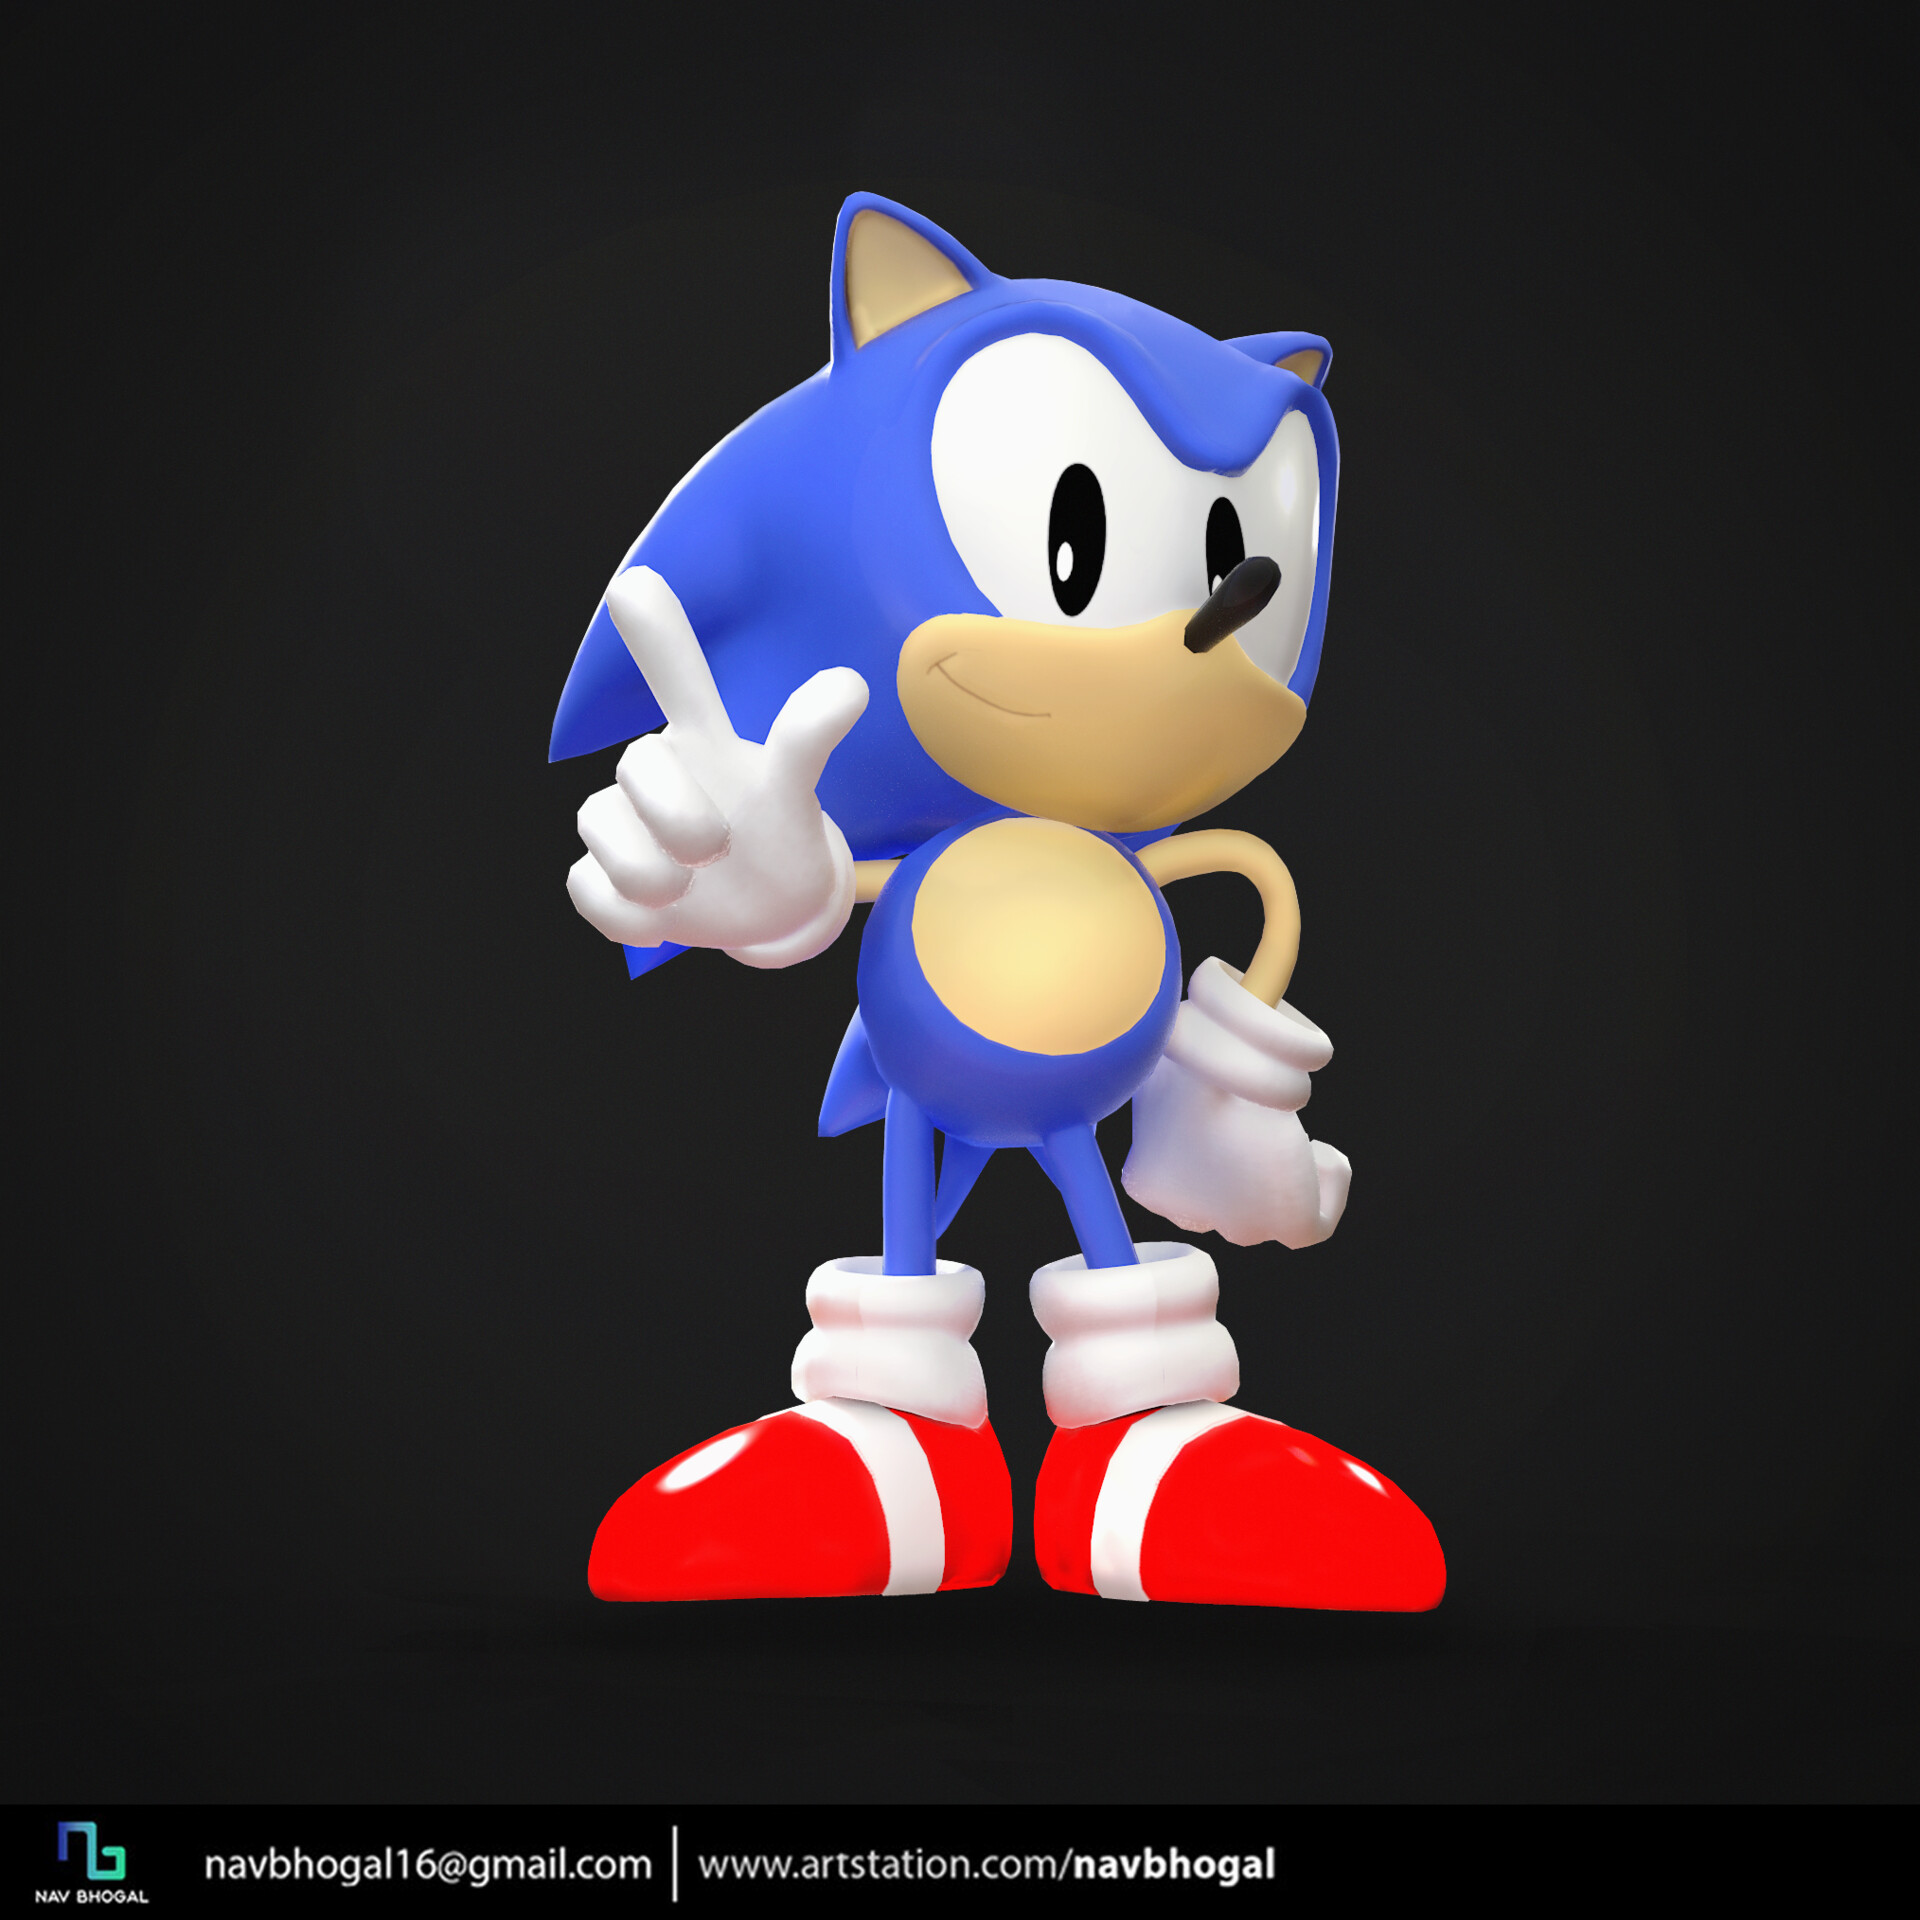 What's your favorite Classic Sonic render?